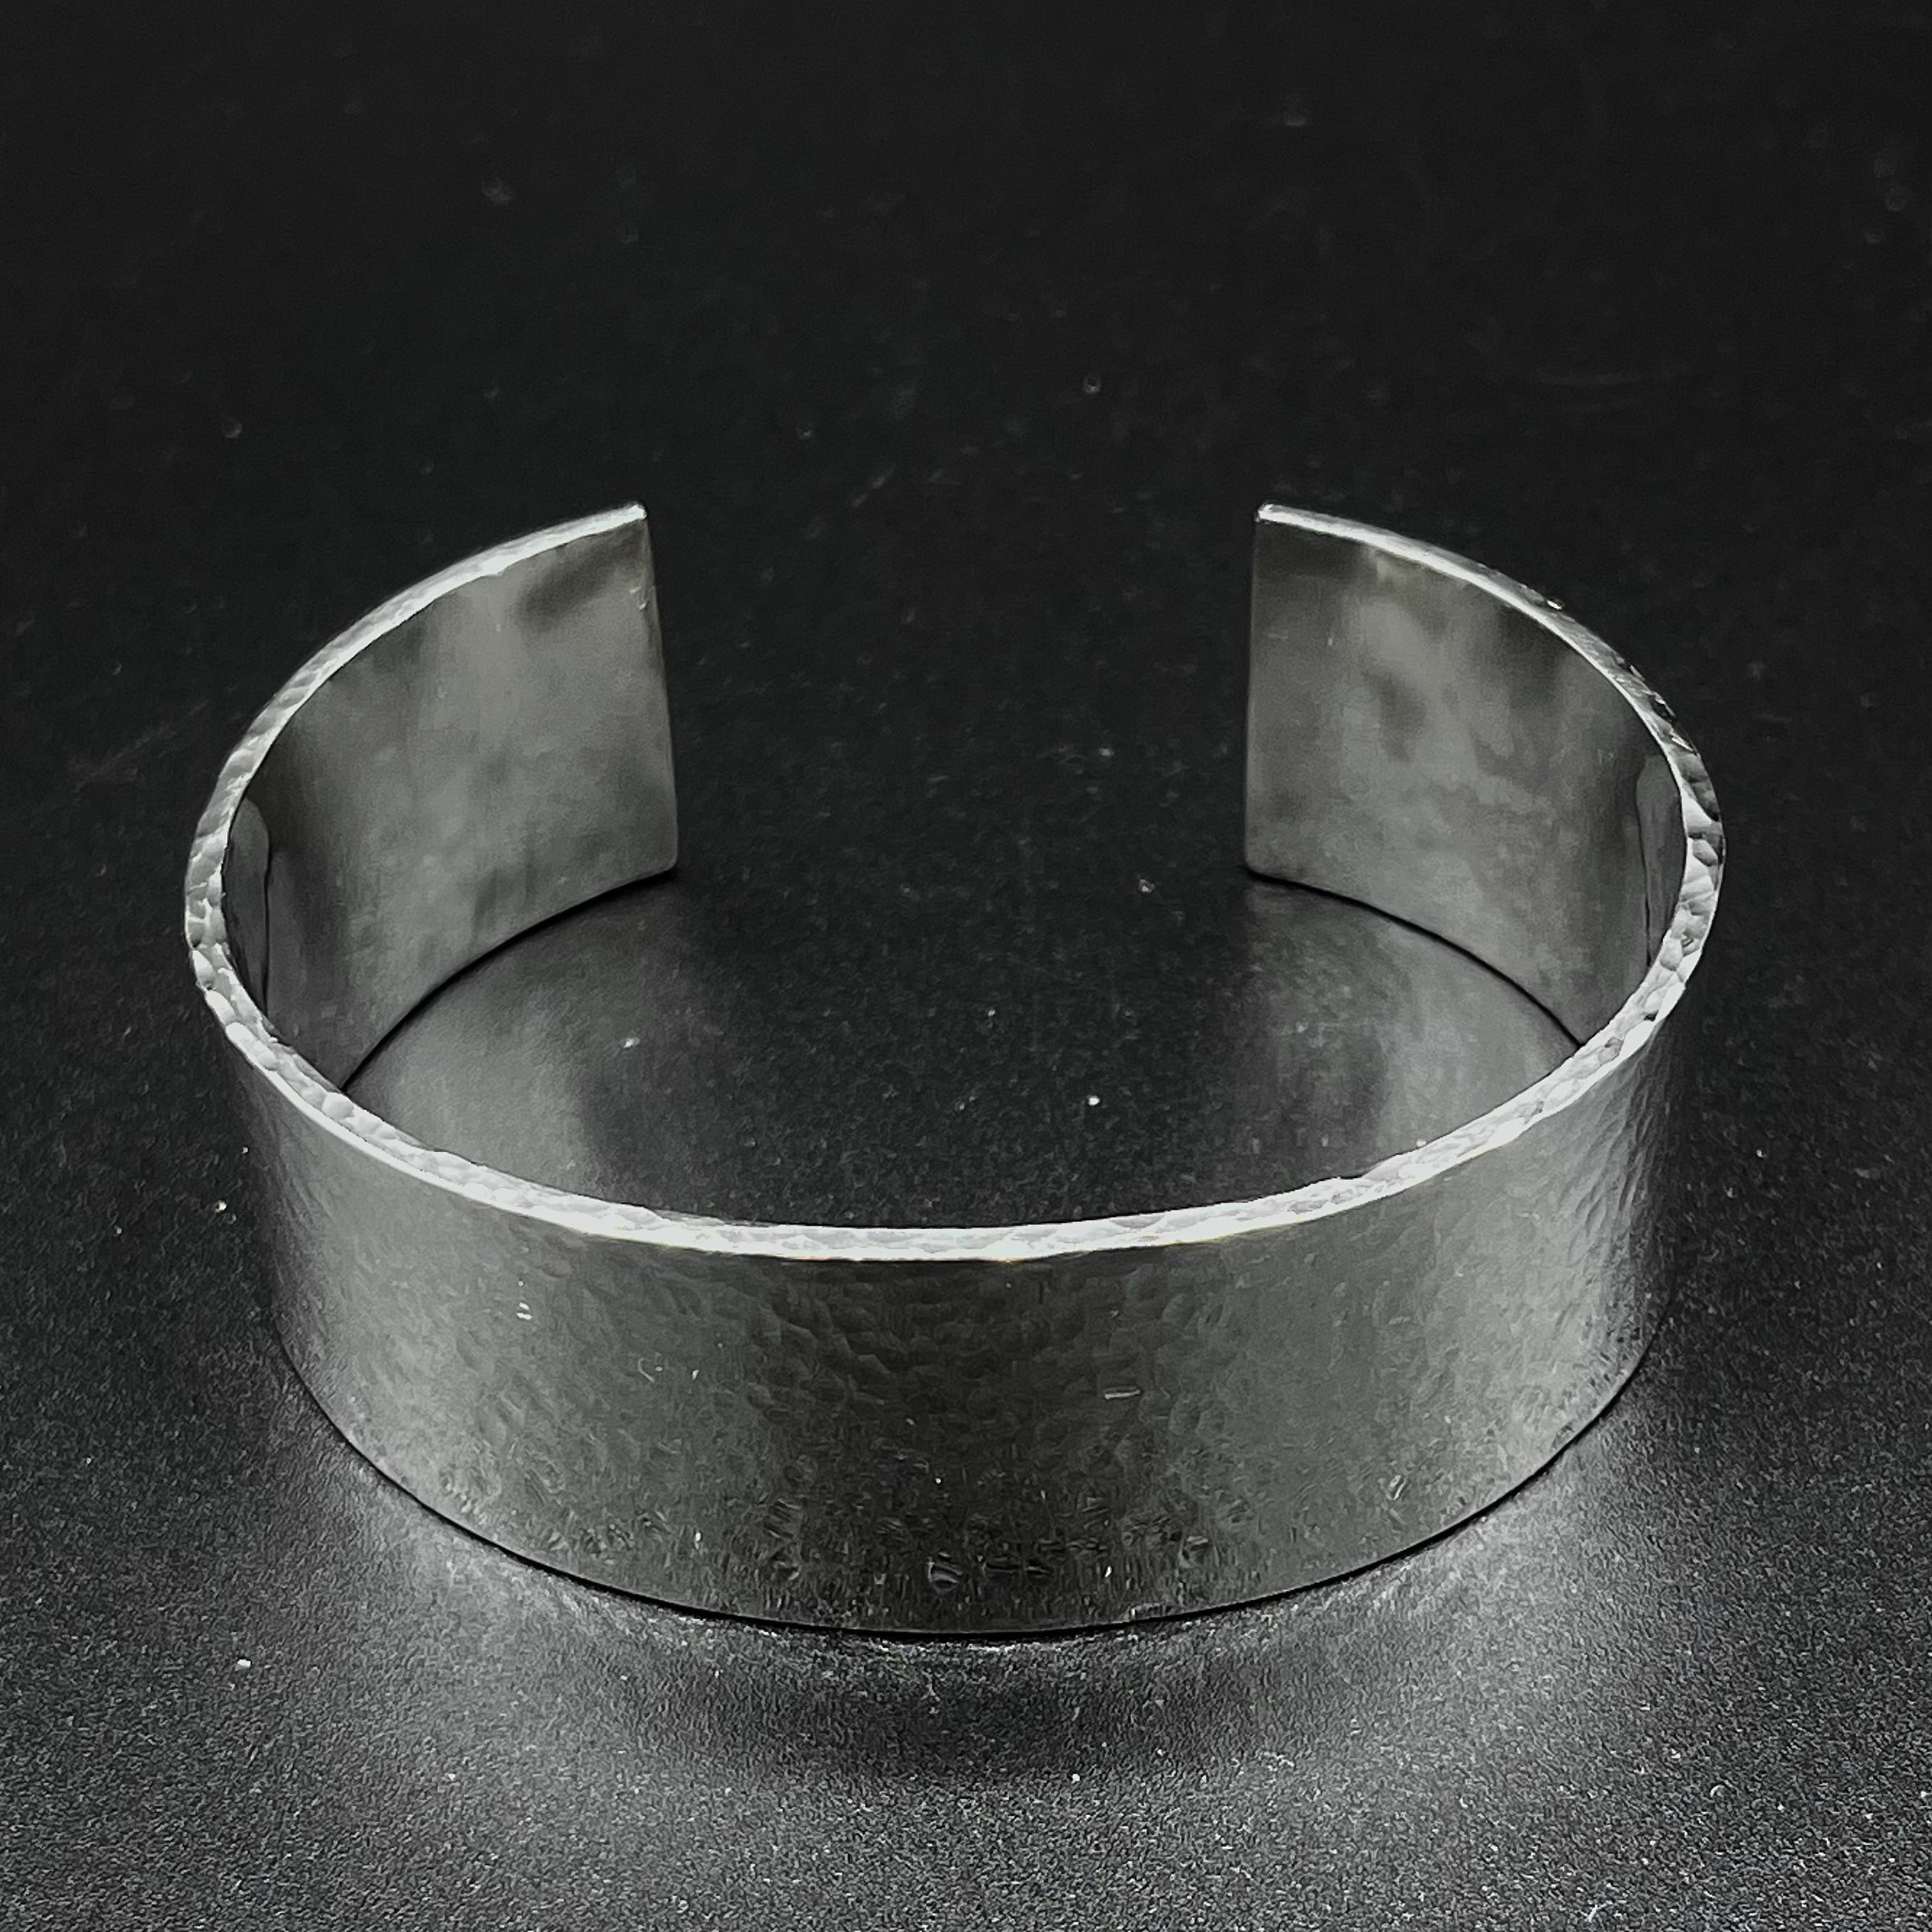 Sterling Silver Bangle/cuff hammered finish. A real statement piece!